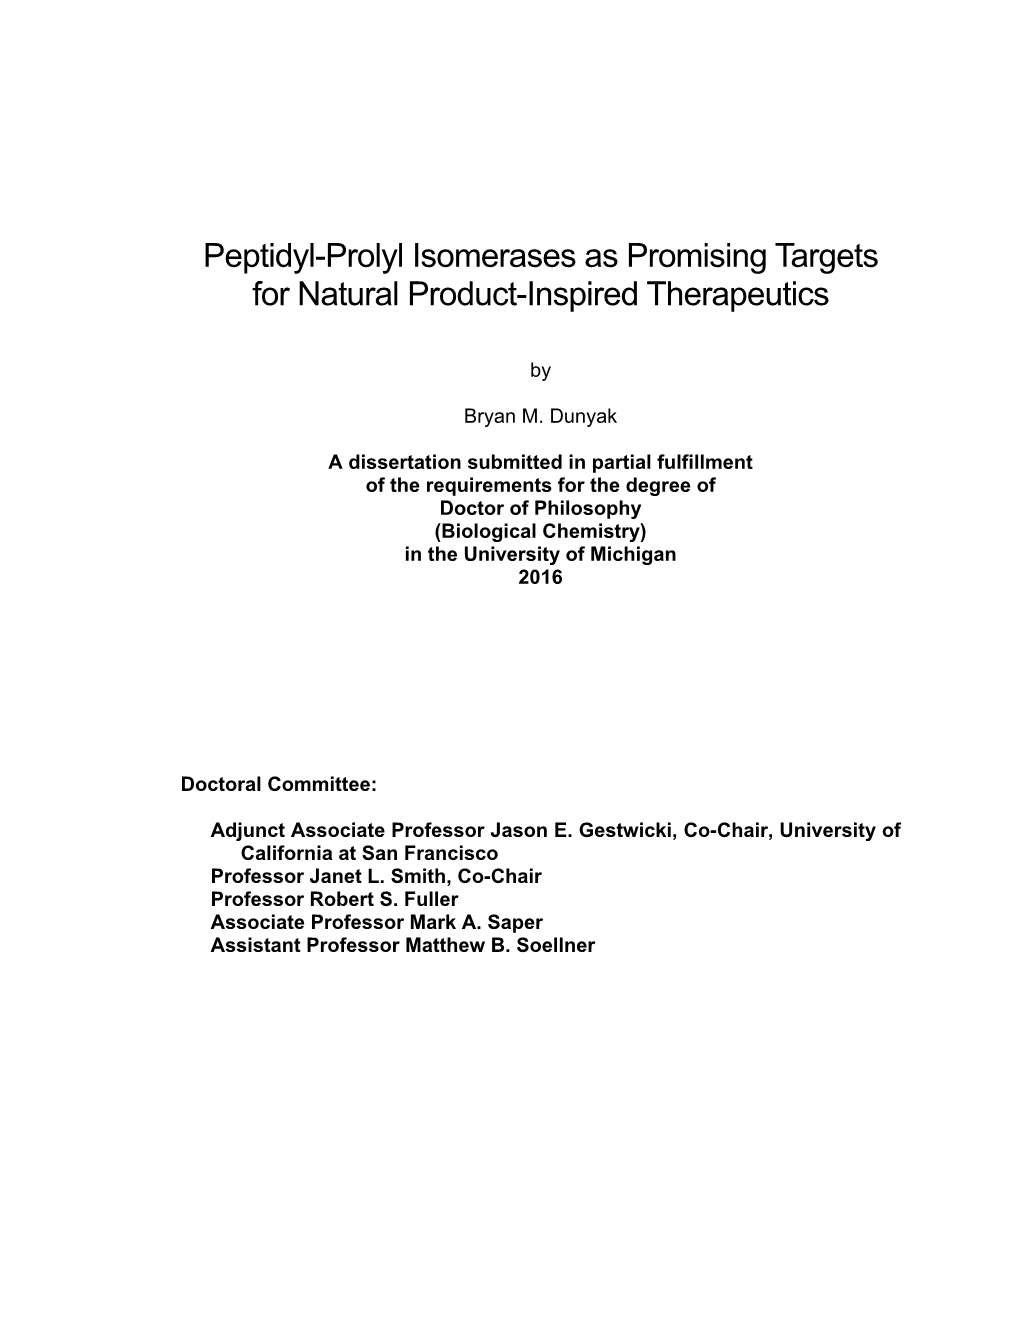 Peptidyl-Prolyl Isomerases As Promising Targets for Natural Product-Inspired Therapeutics